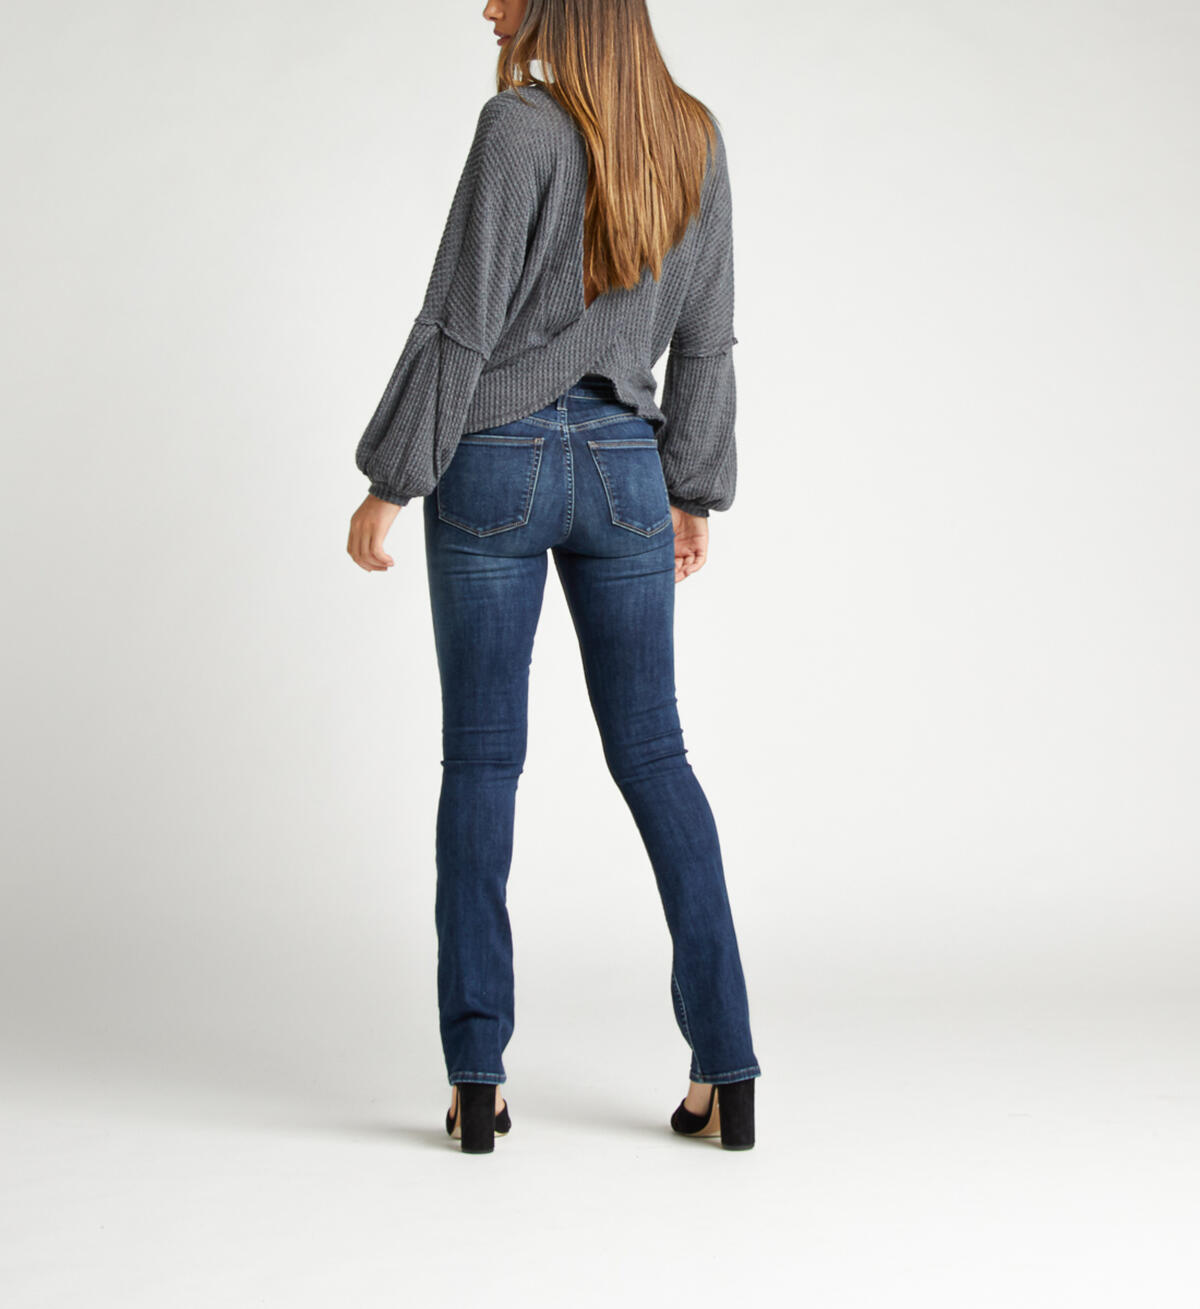 Most Wanted Mid Rise Skinny Bootcut Jeans, , hi-res image number 1